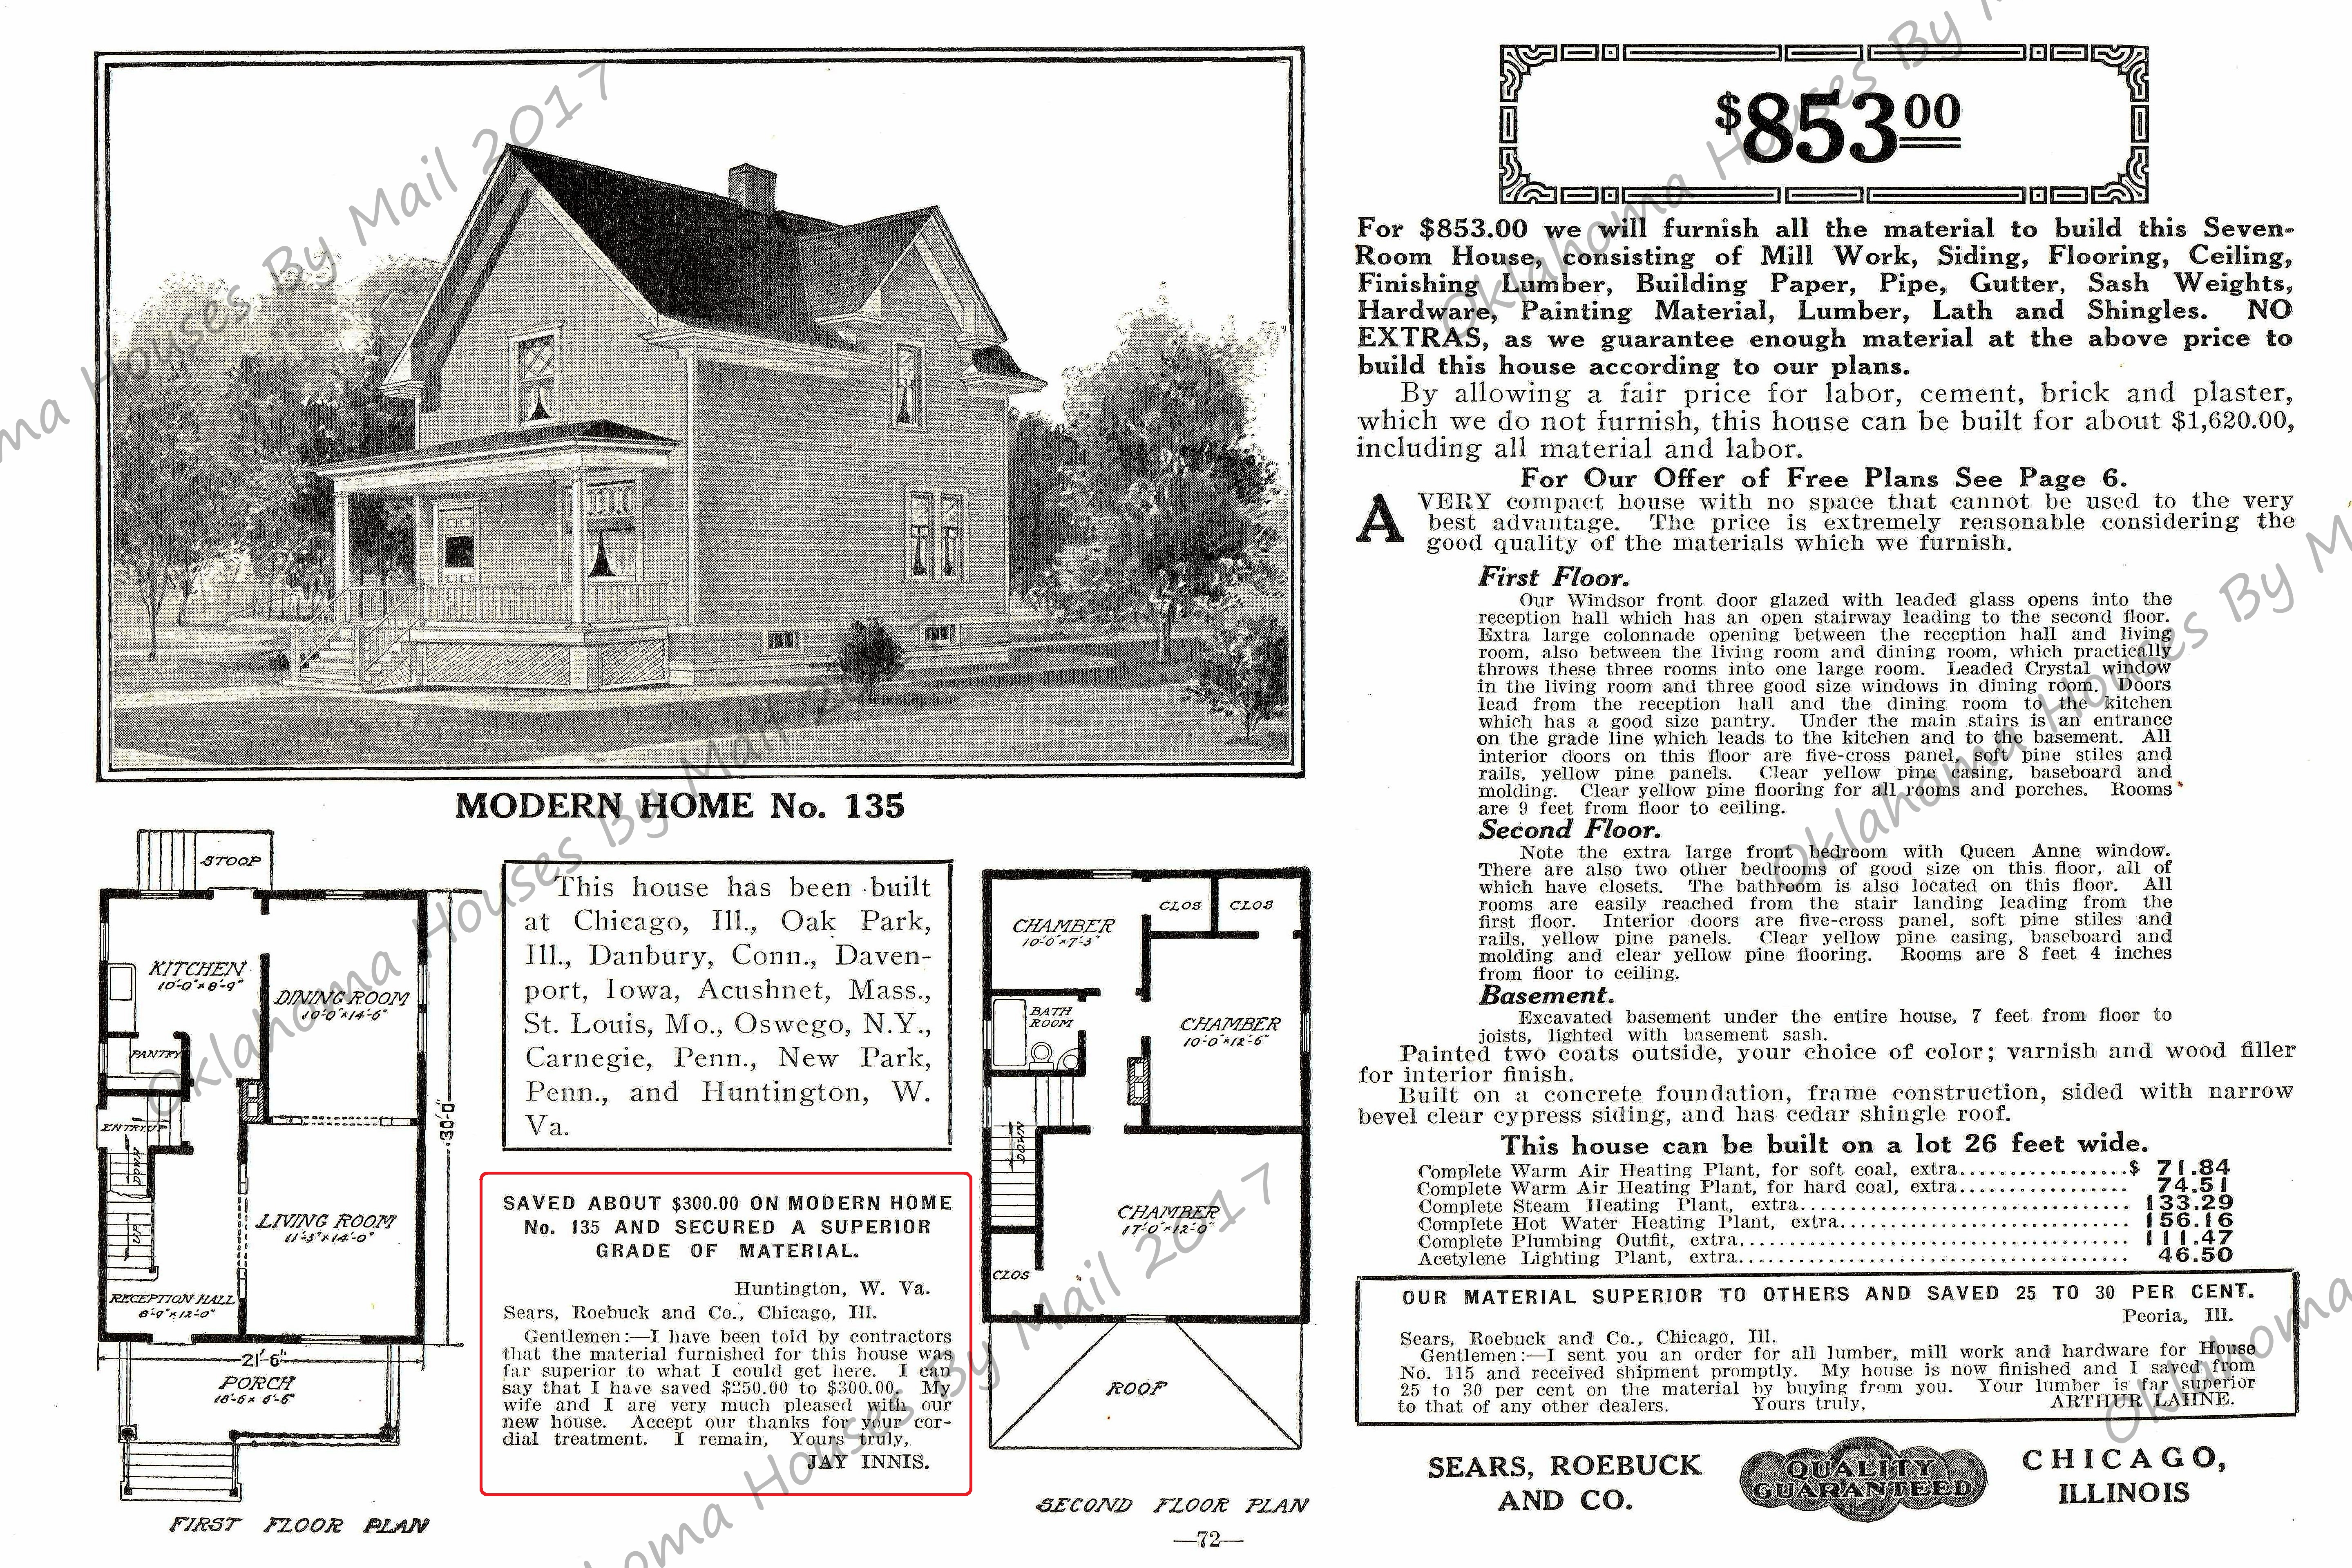 This is the Sears 135 from my 1914/15 catalog. This model was first offered in fall of 1908 and last offered in 1915. You can see a testimony for a 135 built in Huntington, West Virginia. To see the Sears Modern Homes 1914/1915 catalog click here. 